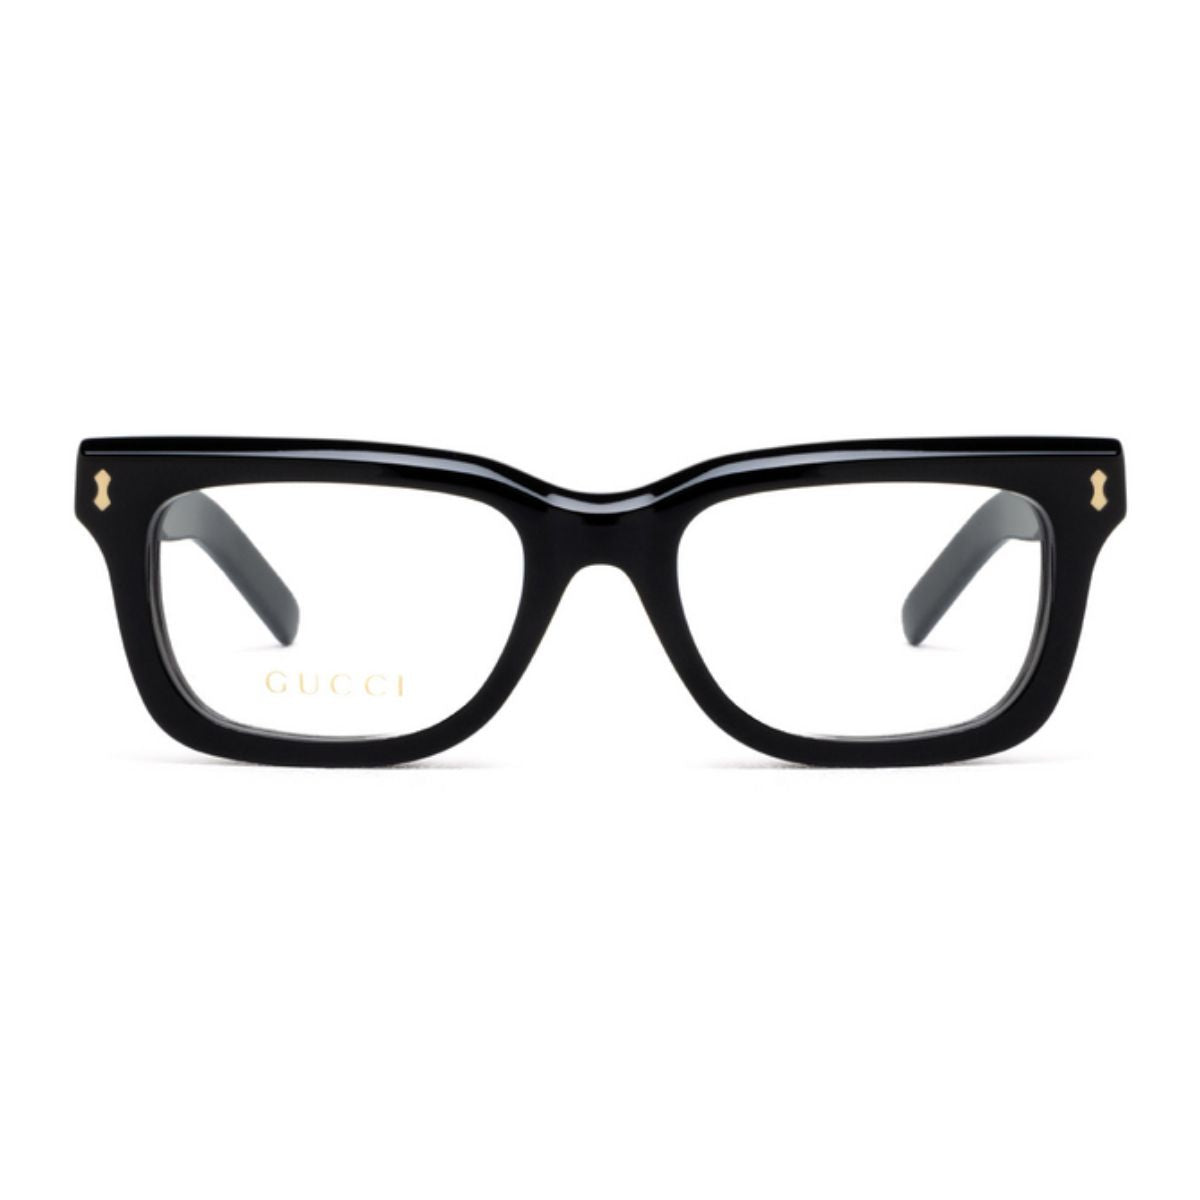 "Gucci 1522O 001 Men's Eyeglass Frames - Sophisticated and sleek design for the modern man, showcasing Gucci's iconic style."